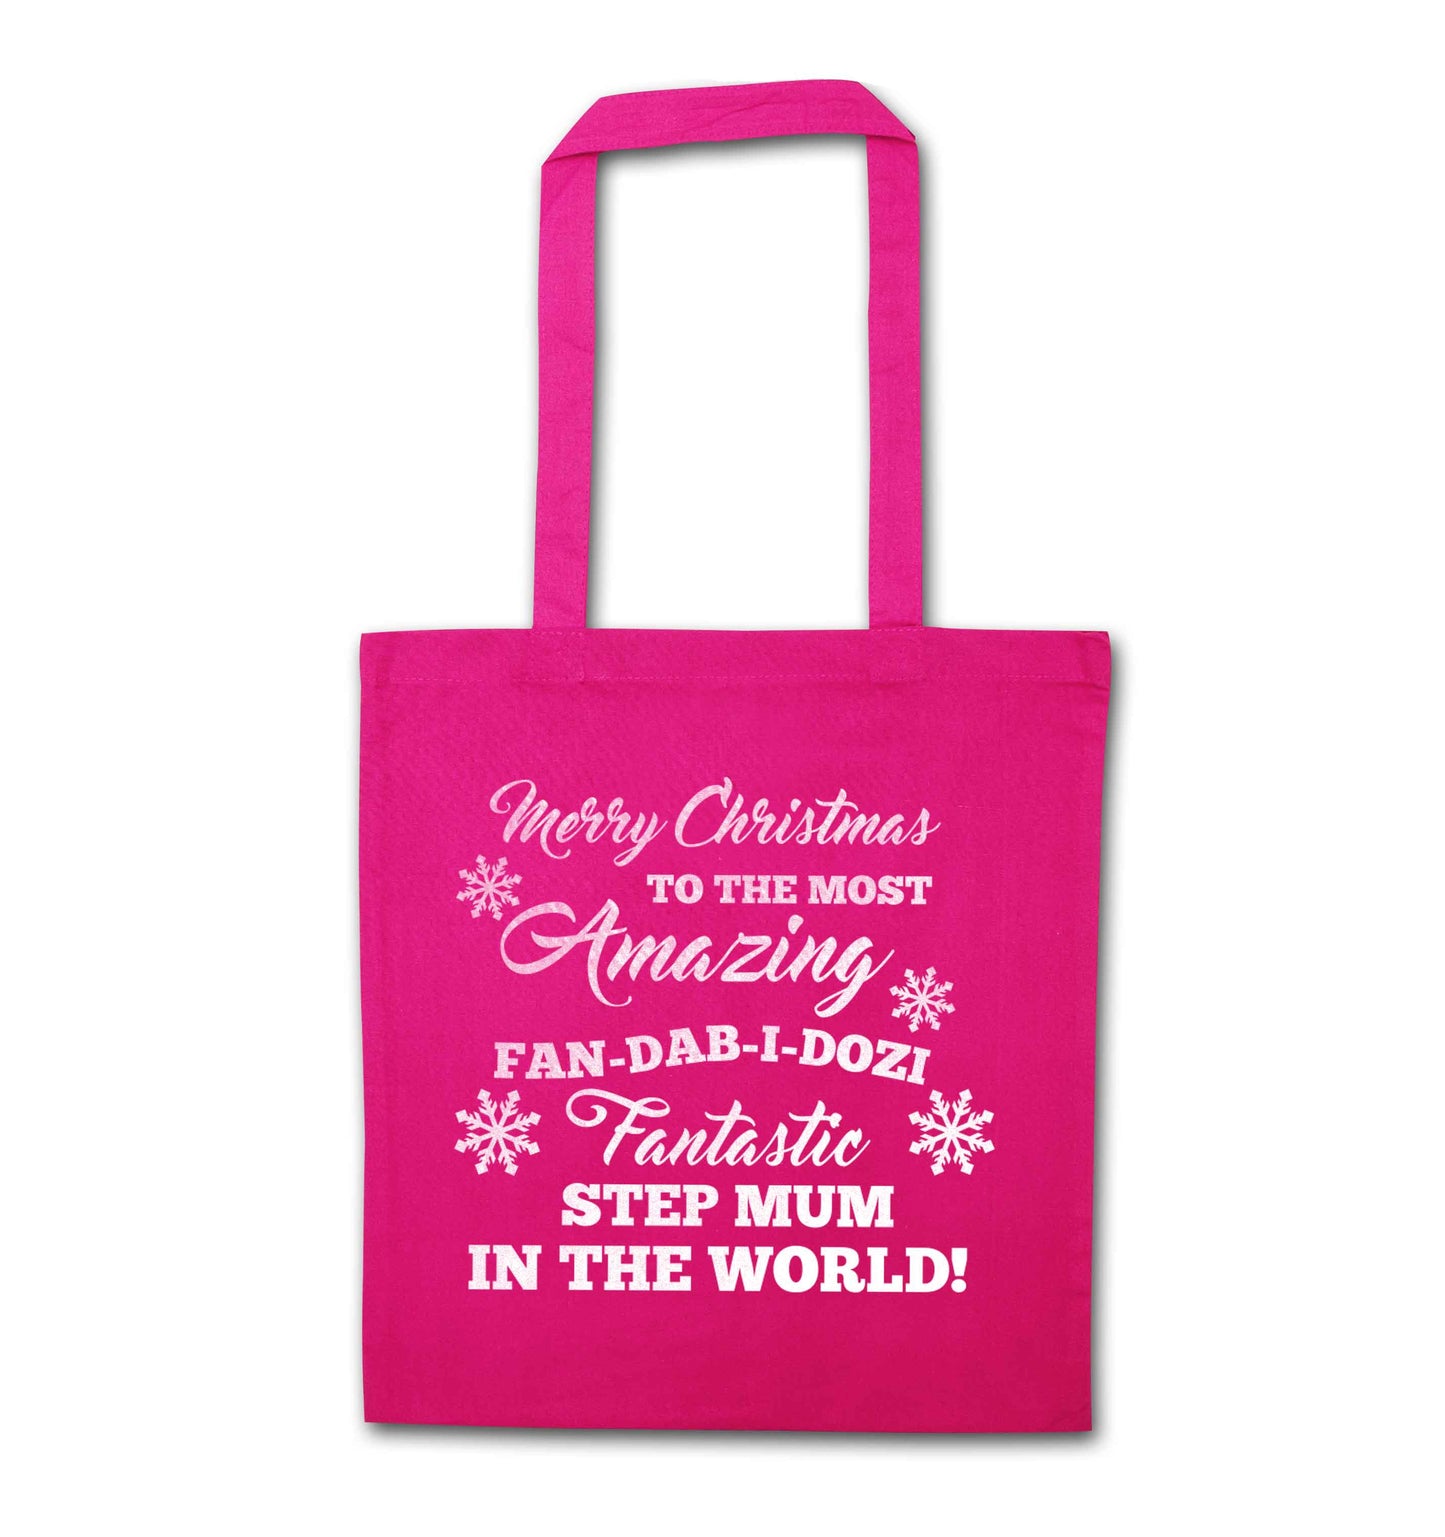 Merry Christmas to the most amazing fan-dab-i-dozi fantasic Step Mum in the world pink tote bag